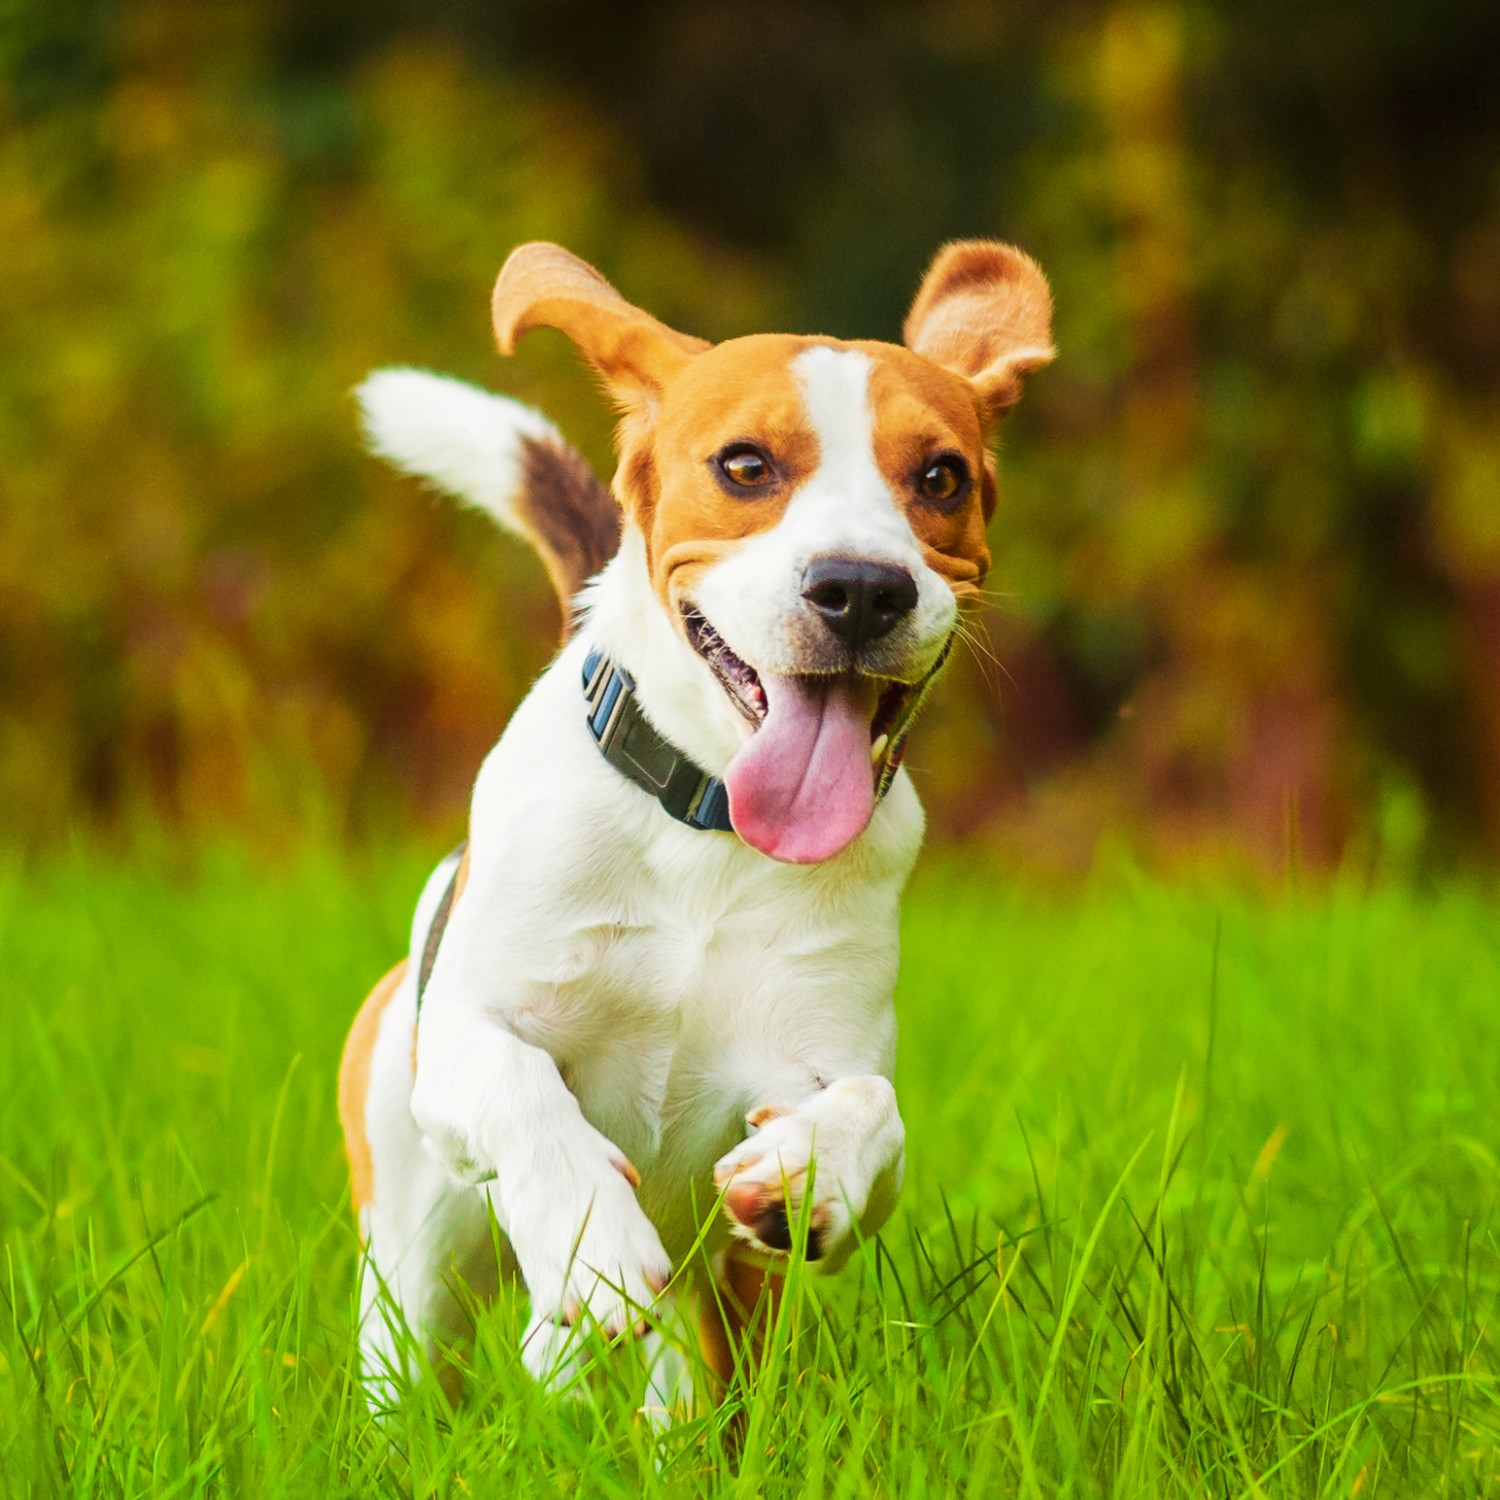 Brown and White Dog running in Grass - Rehabilitation Services